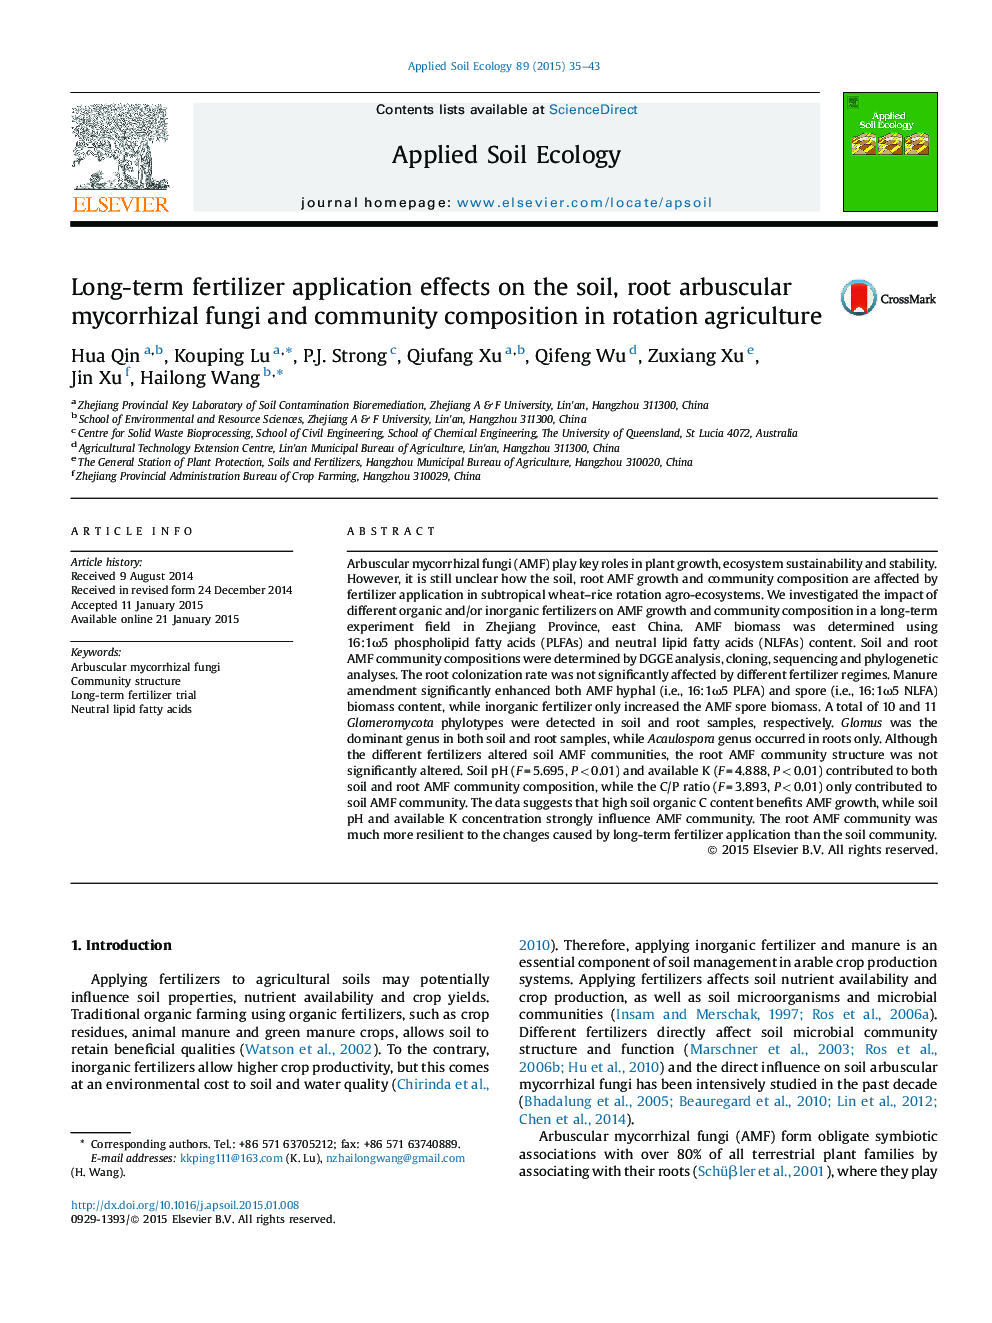 Long-term fertilizer application effects on the soil, root arbuscular mycorrhizal fungi and community composition in rotation agriculture